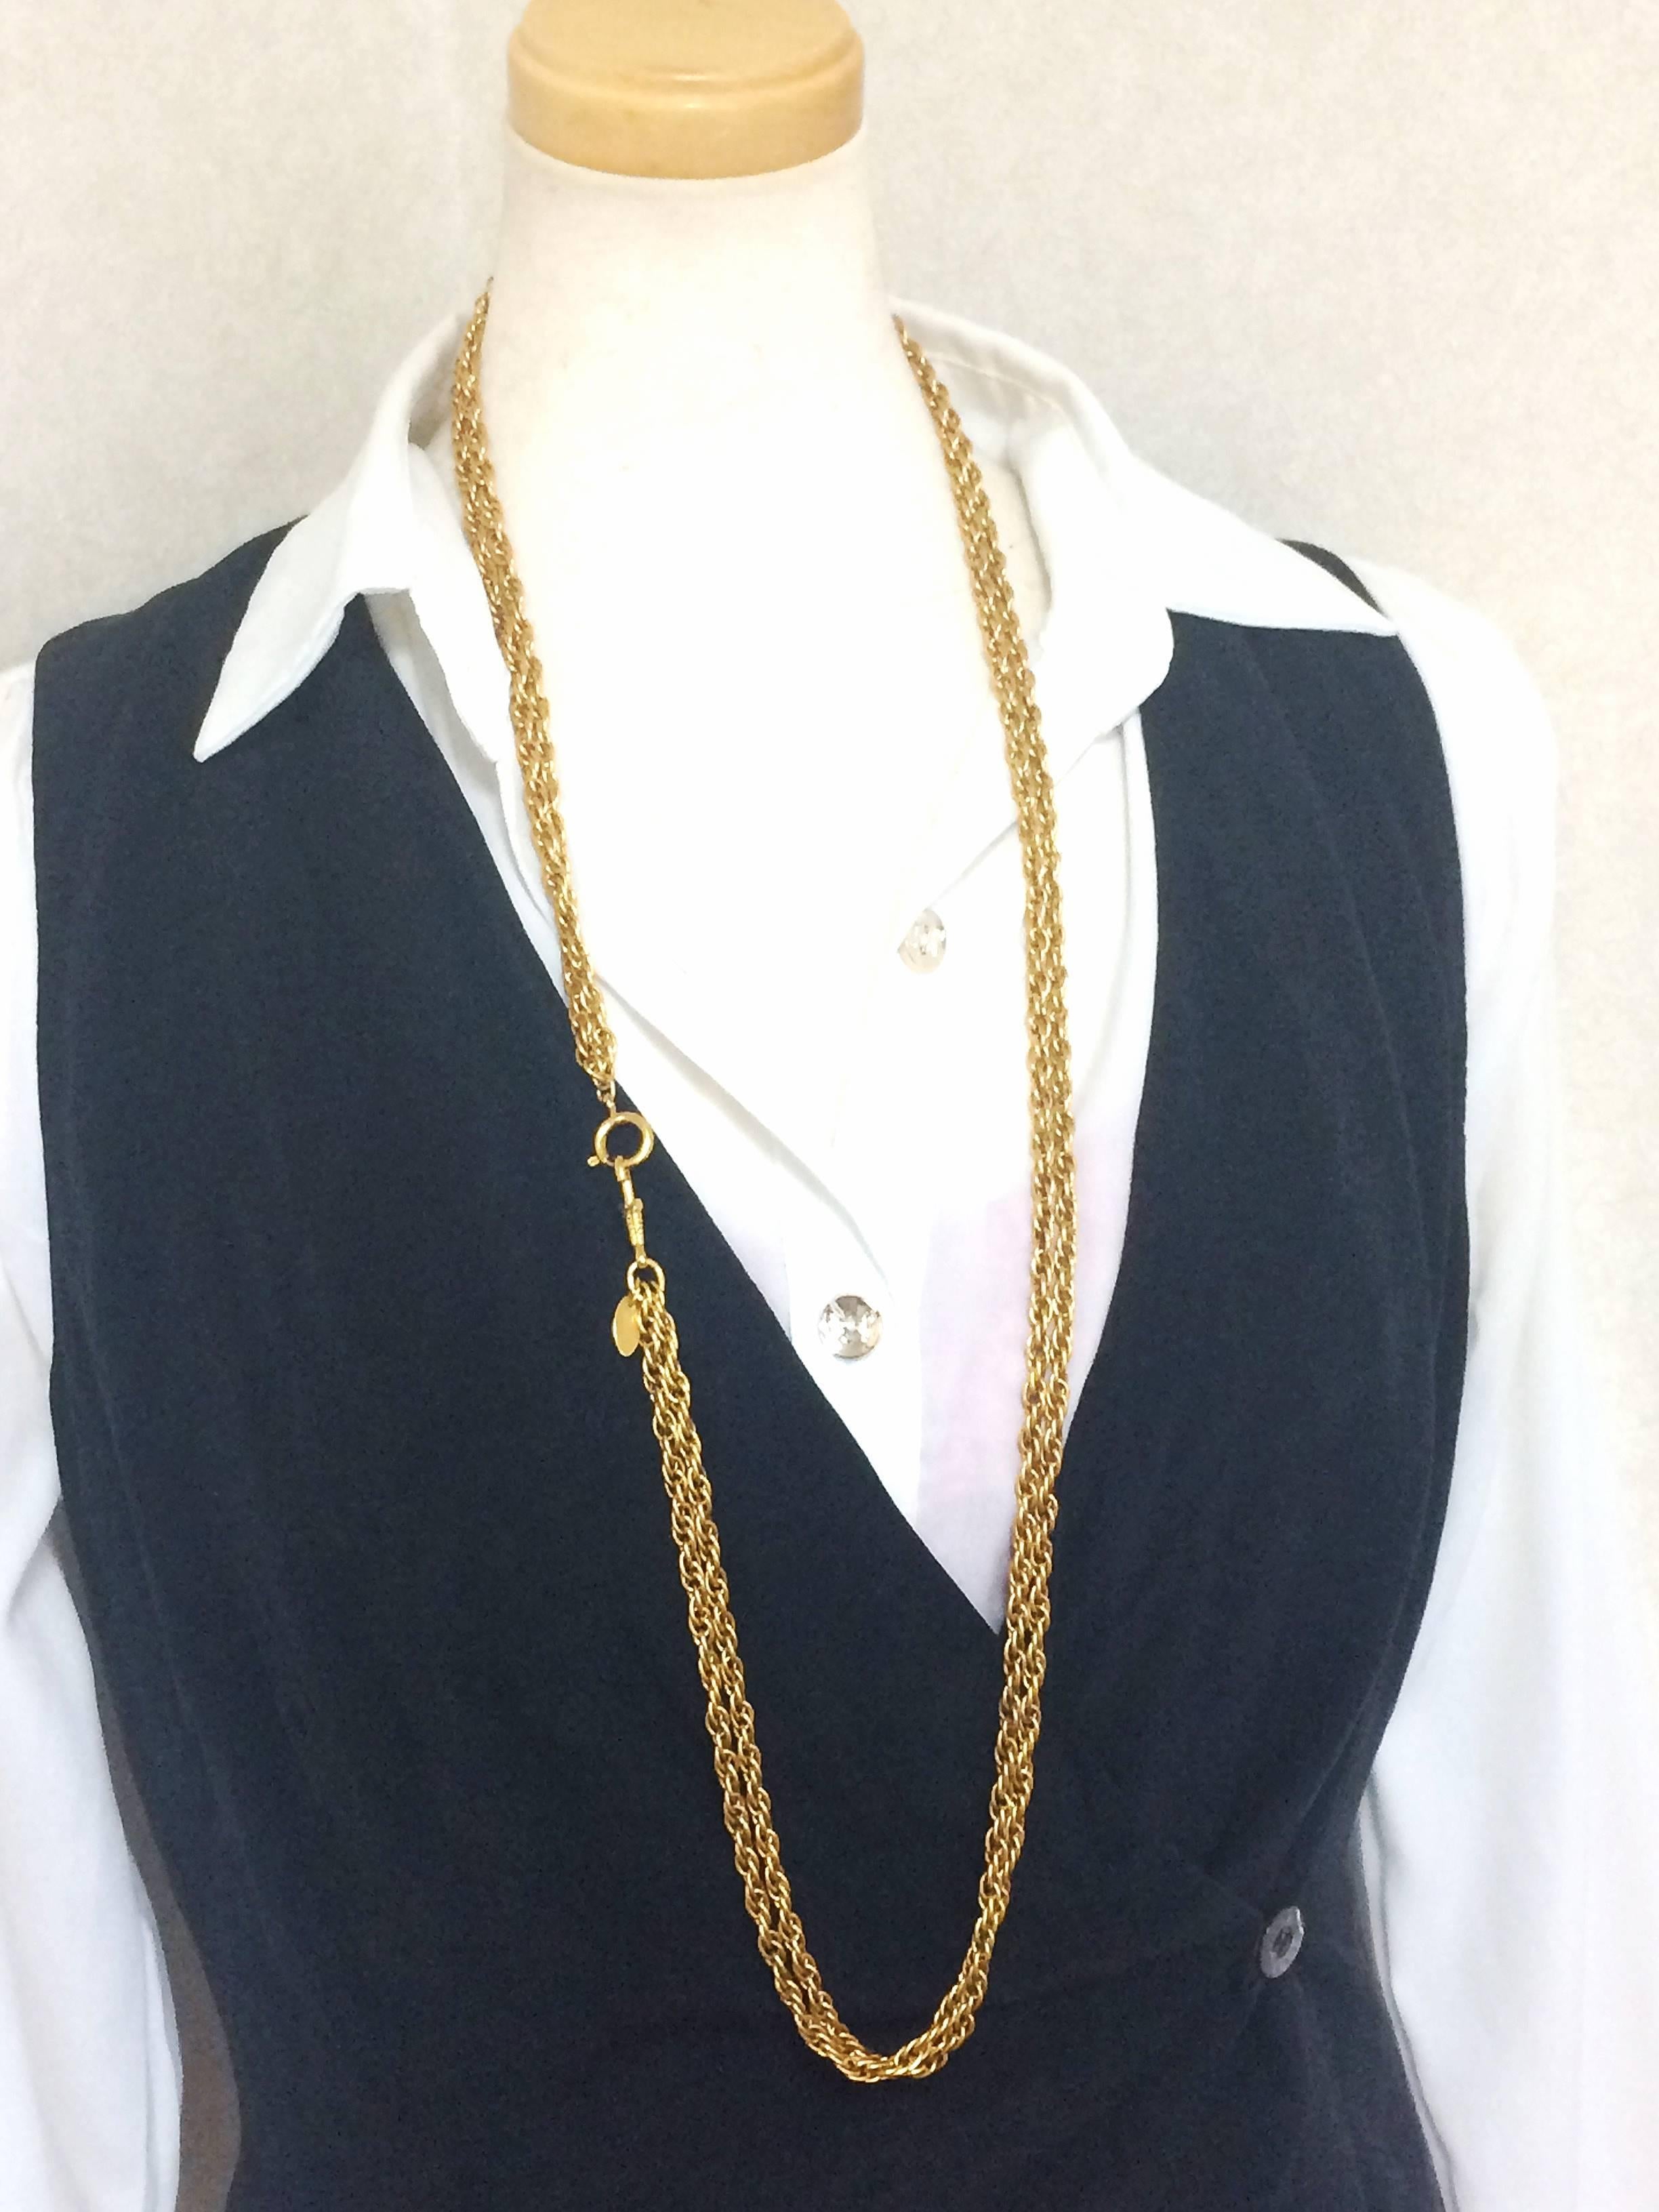 1990s. Vintage CHANEL double golden skinny chain long necklace. Classic and simple necklace. 

Introducing a classic and simple necklace from CHANEL back in the 90's, golden skinny double chain necklace.

Featuring a hock that you can also